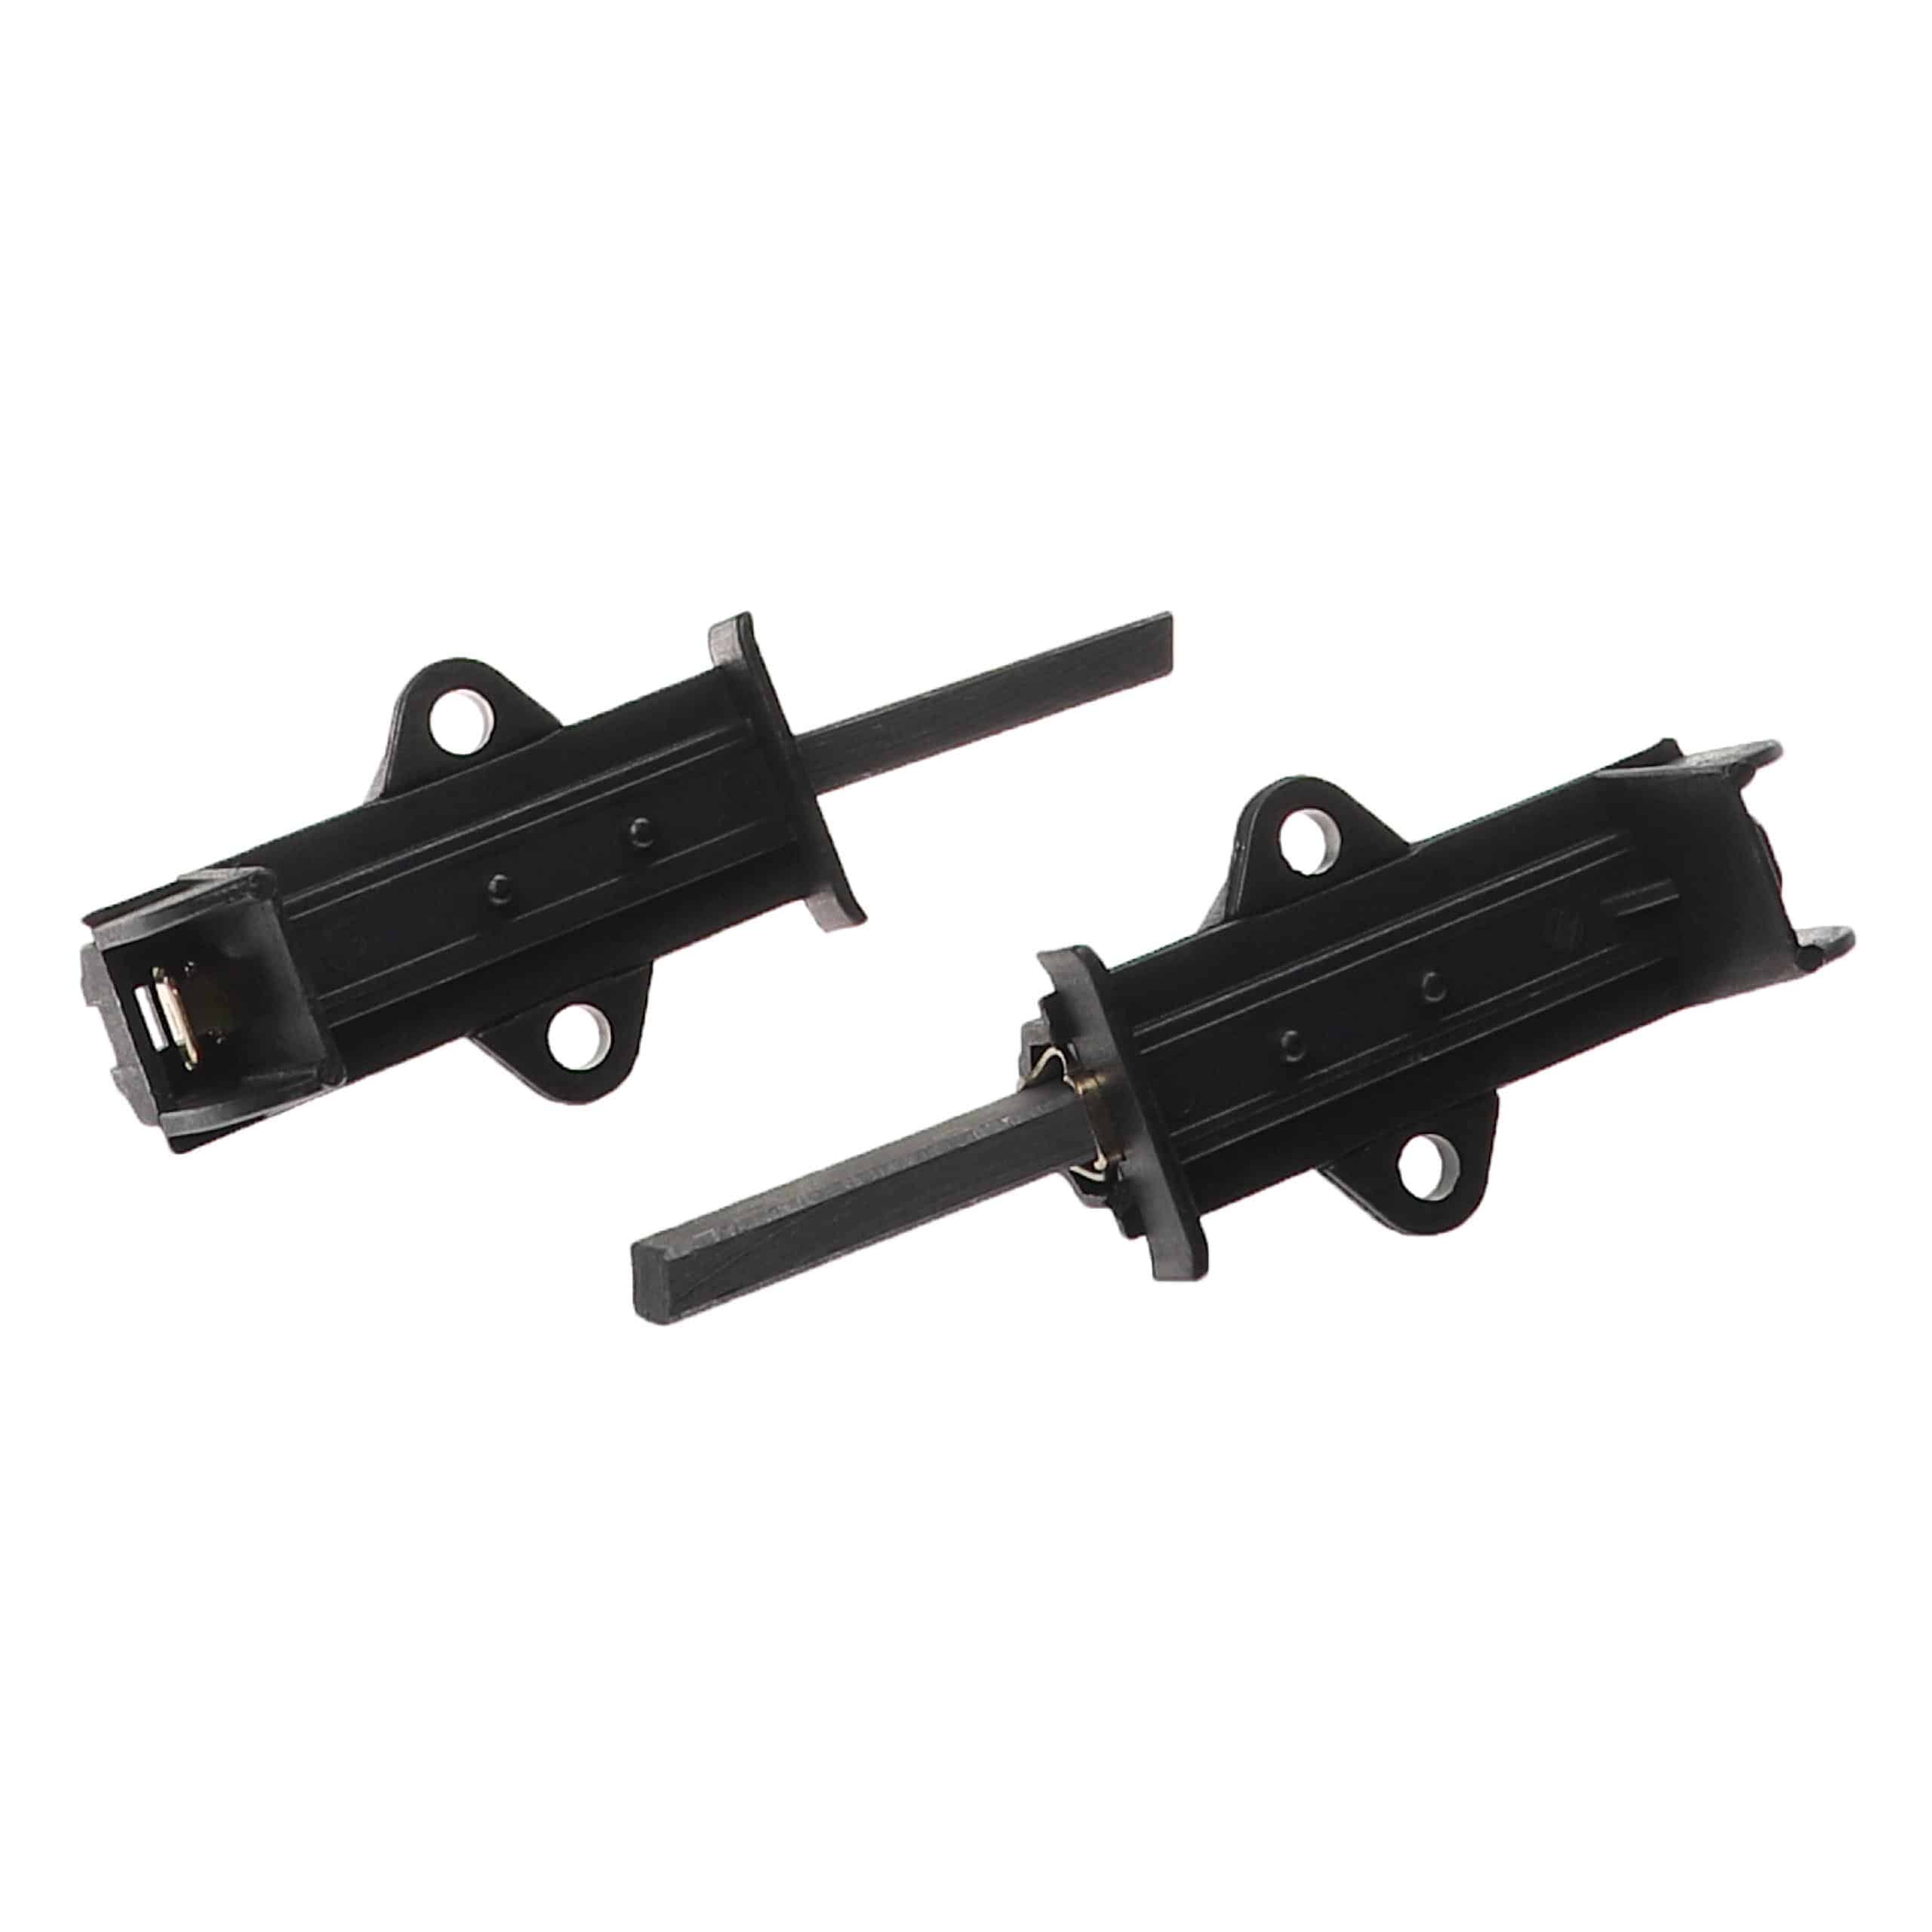 2x Carbon Brush as Replacement for 371201201, 371201202 Electric Power Tools + Holder, 5 x 12.5 x 29mm